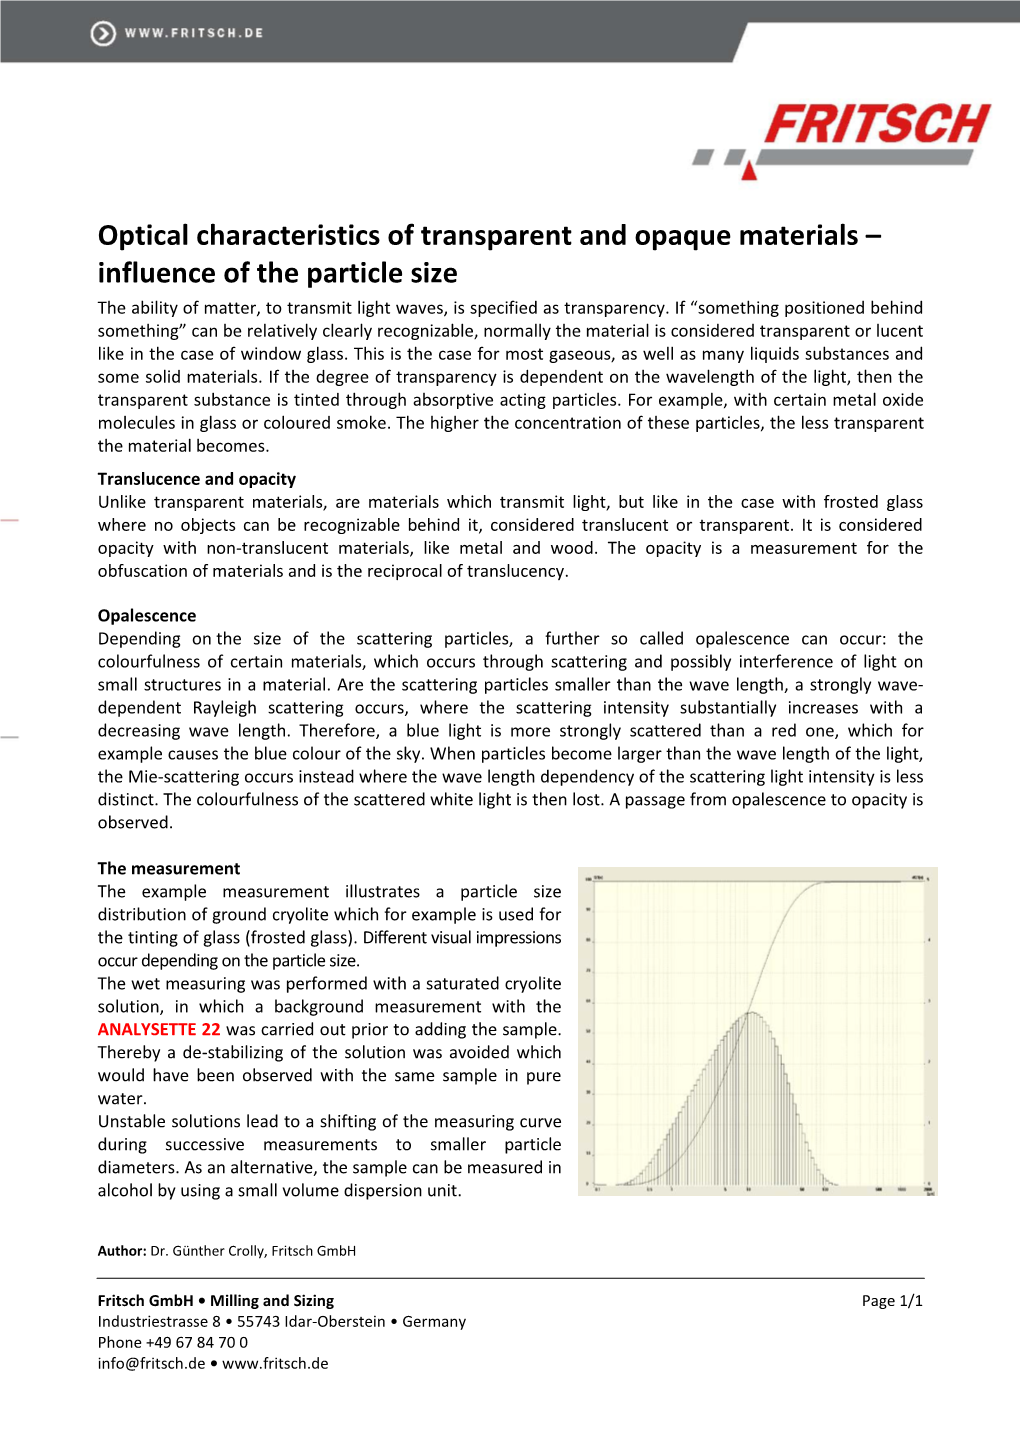 Optical Characteristics of Transparent and Opaque Materials – Influence of the Particle Size